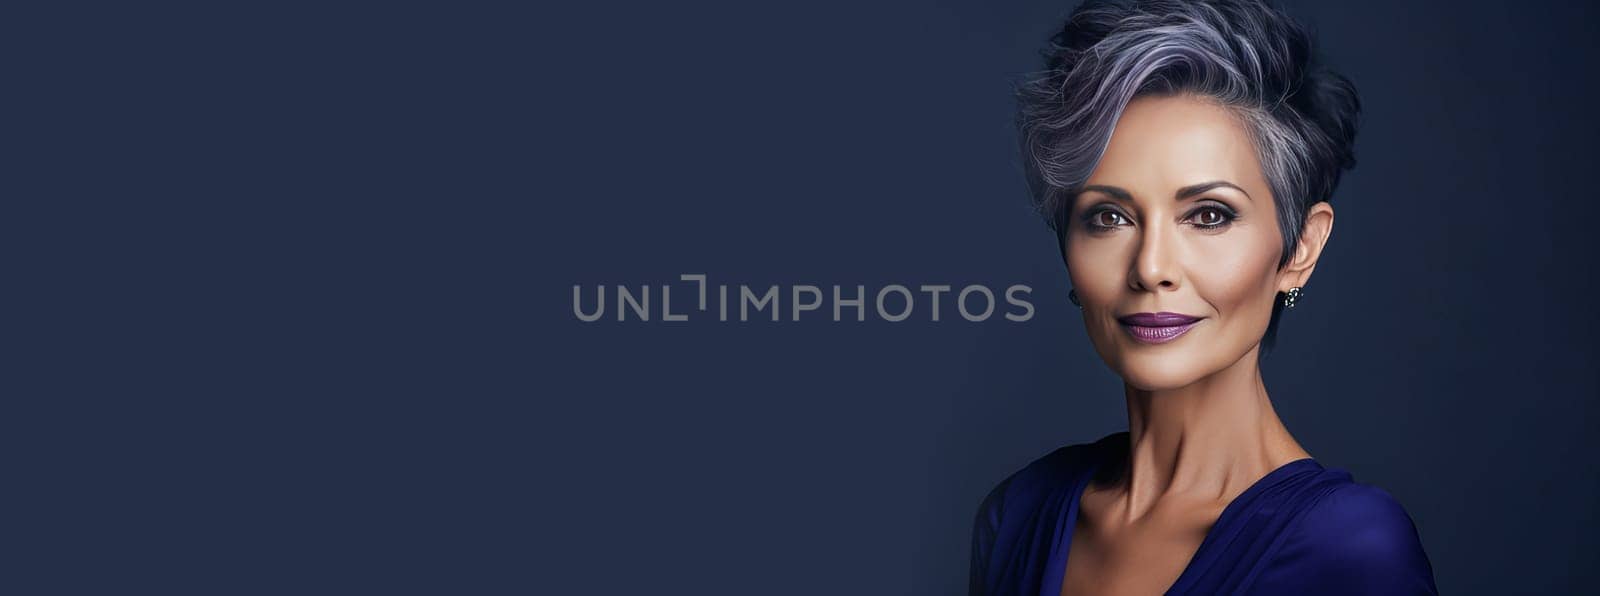 Elegant, smiling elderly, chic latino, Spain woman with gray hair and perfect skin, blue background banner. Advertising of cosmetic products, spa treatments, shampoos and hair care products, dentistry and medicine, perfumes and cosmetology for women